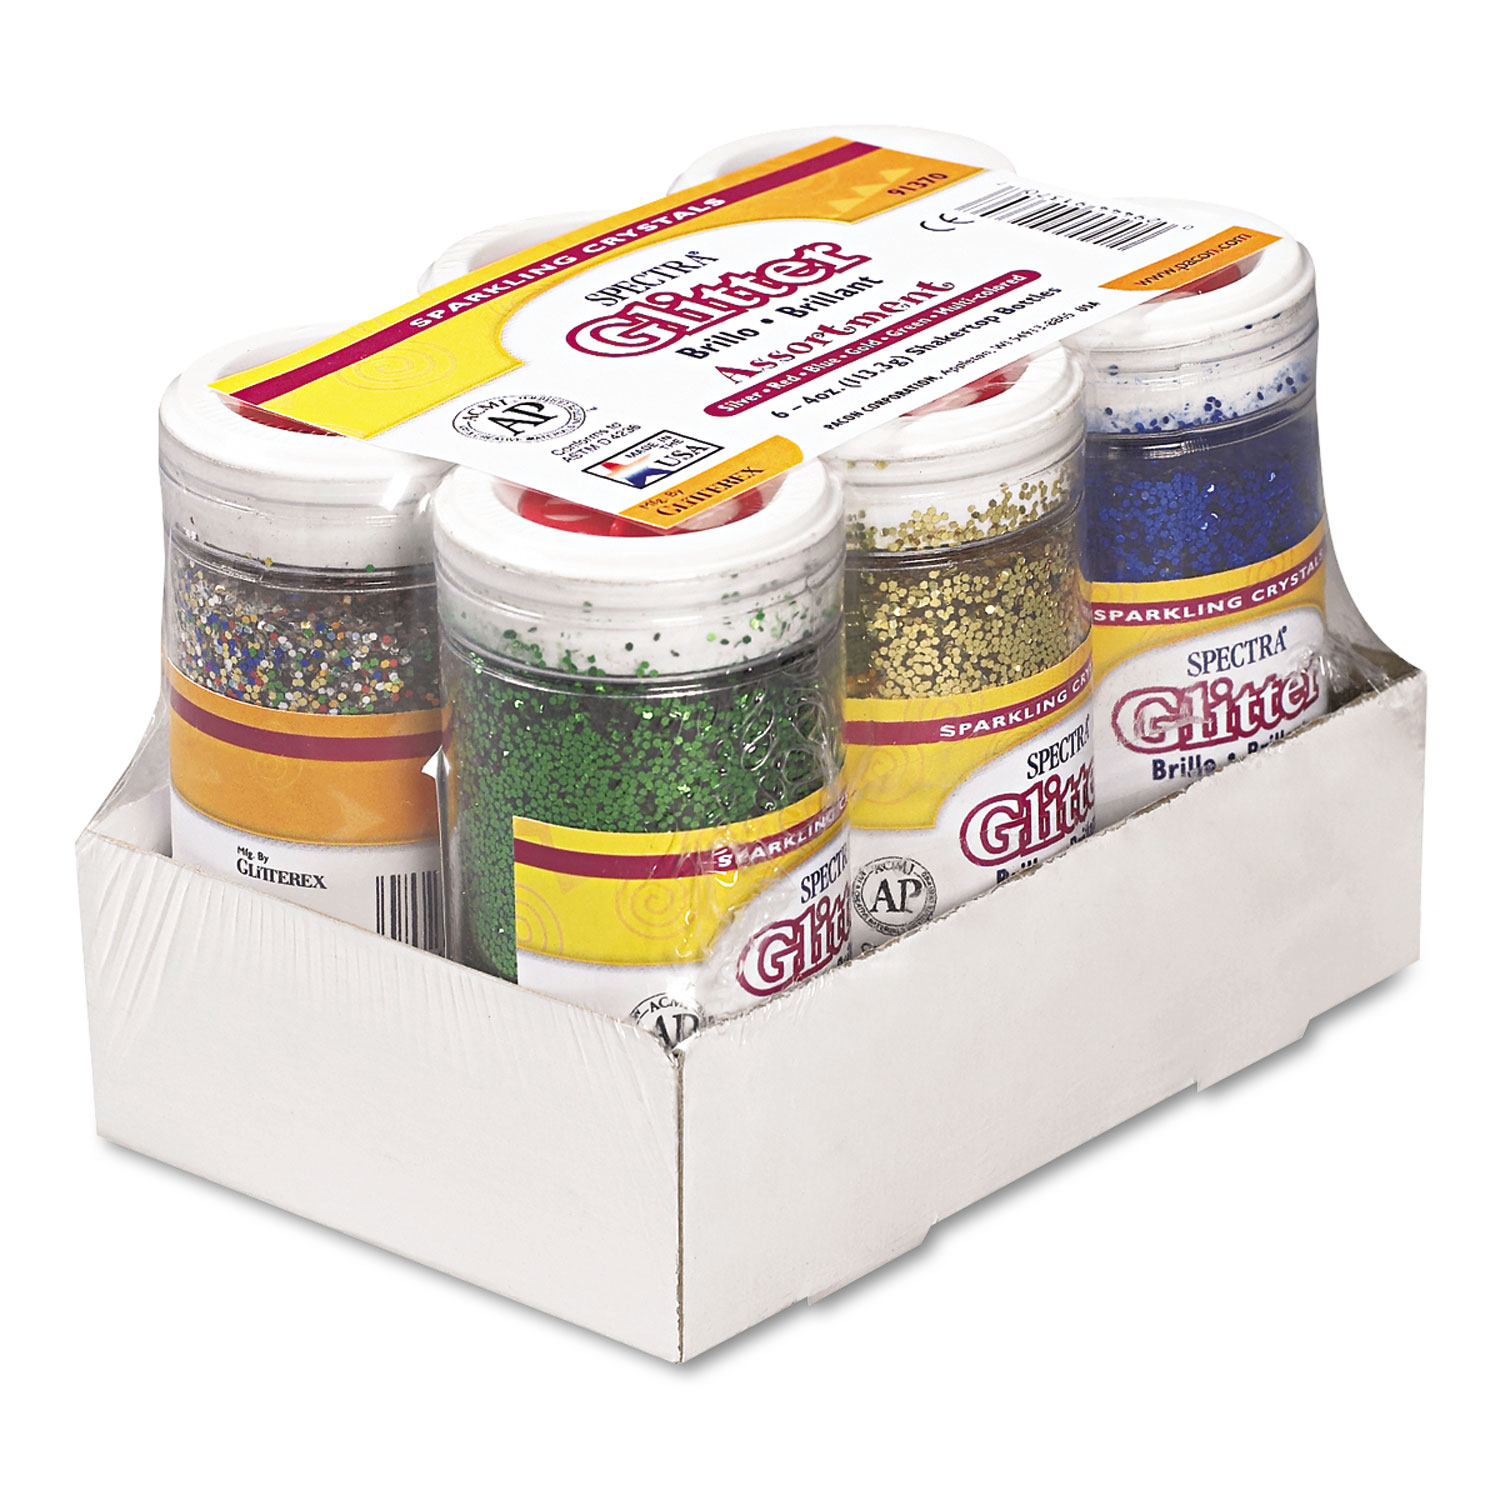  Pacon 91370 Spectra Glitter, .04 Hexagon Crystals, Assorted, 4 oz Shaker-Top Jar, 6/Pack (PAC91370) 